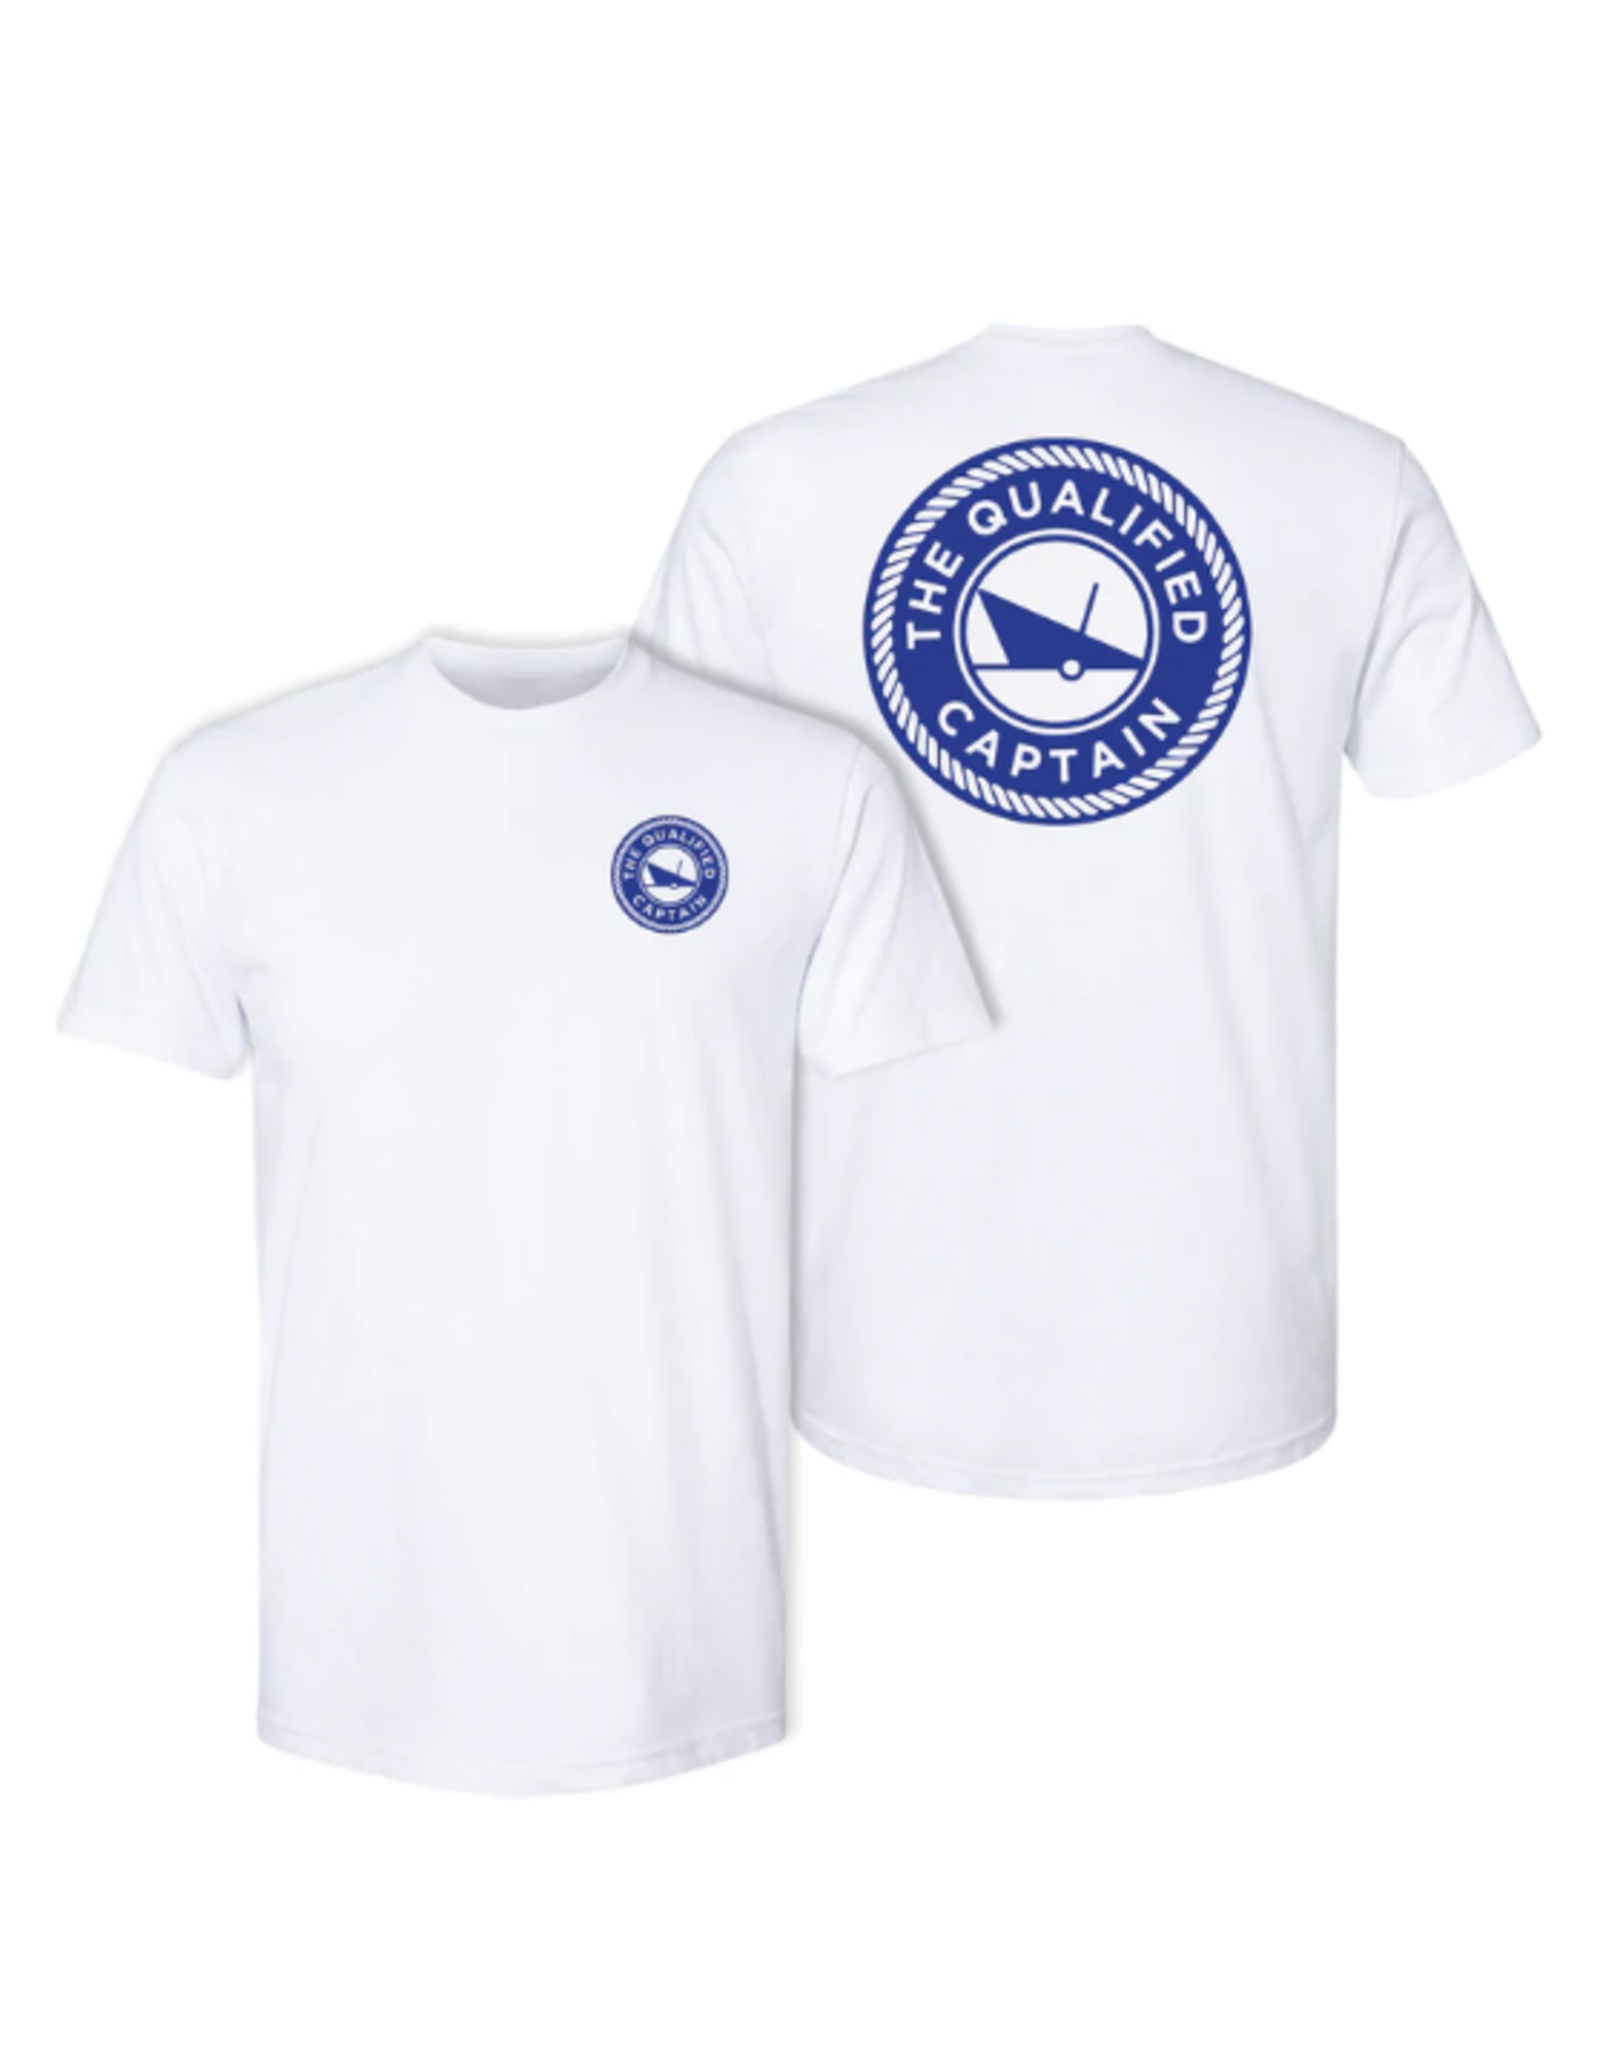 The Qualified Captain TQC Qualified Tee